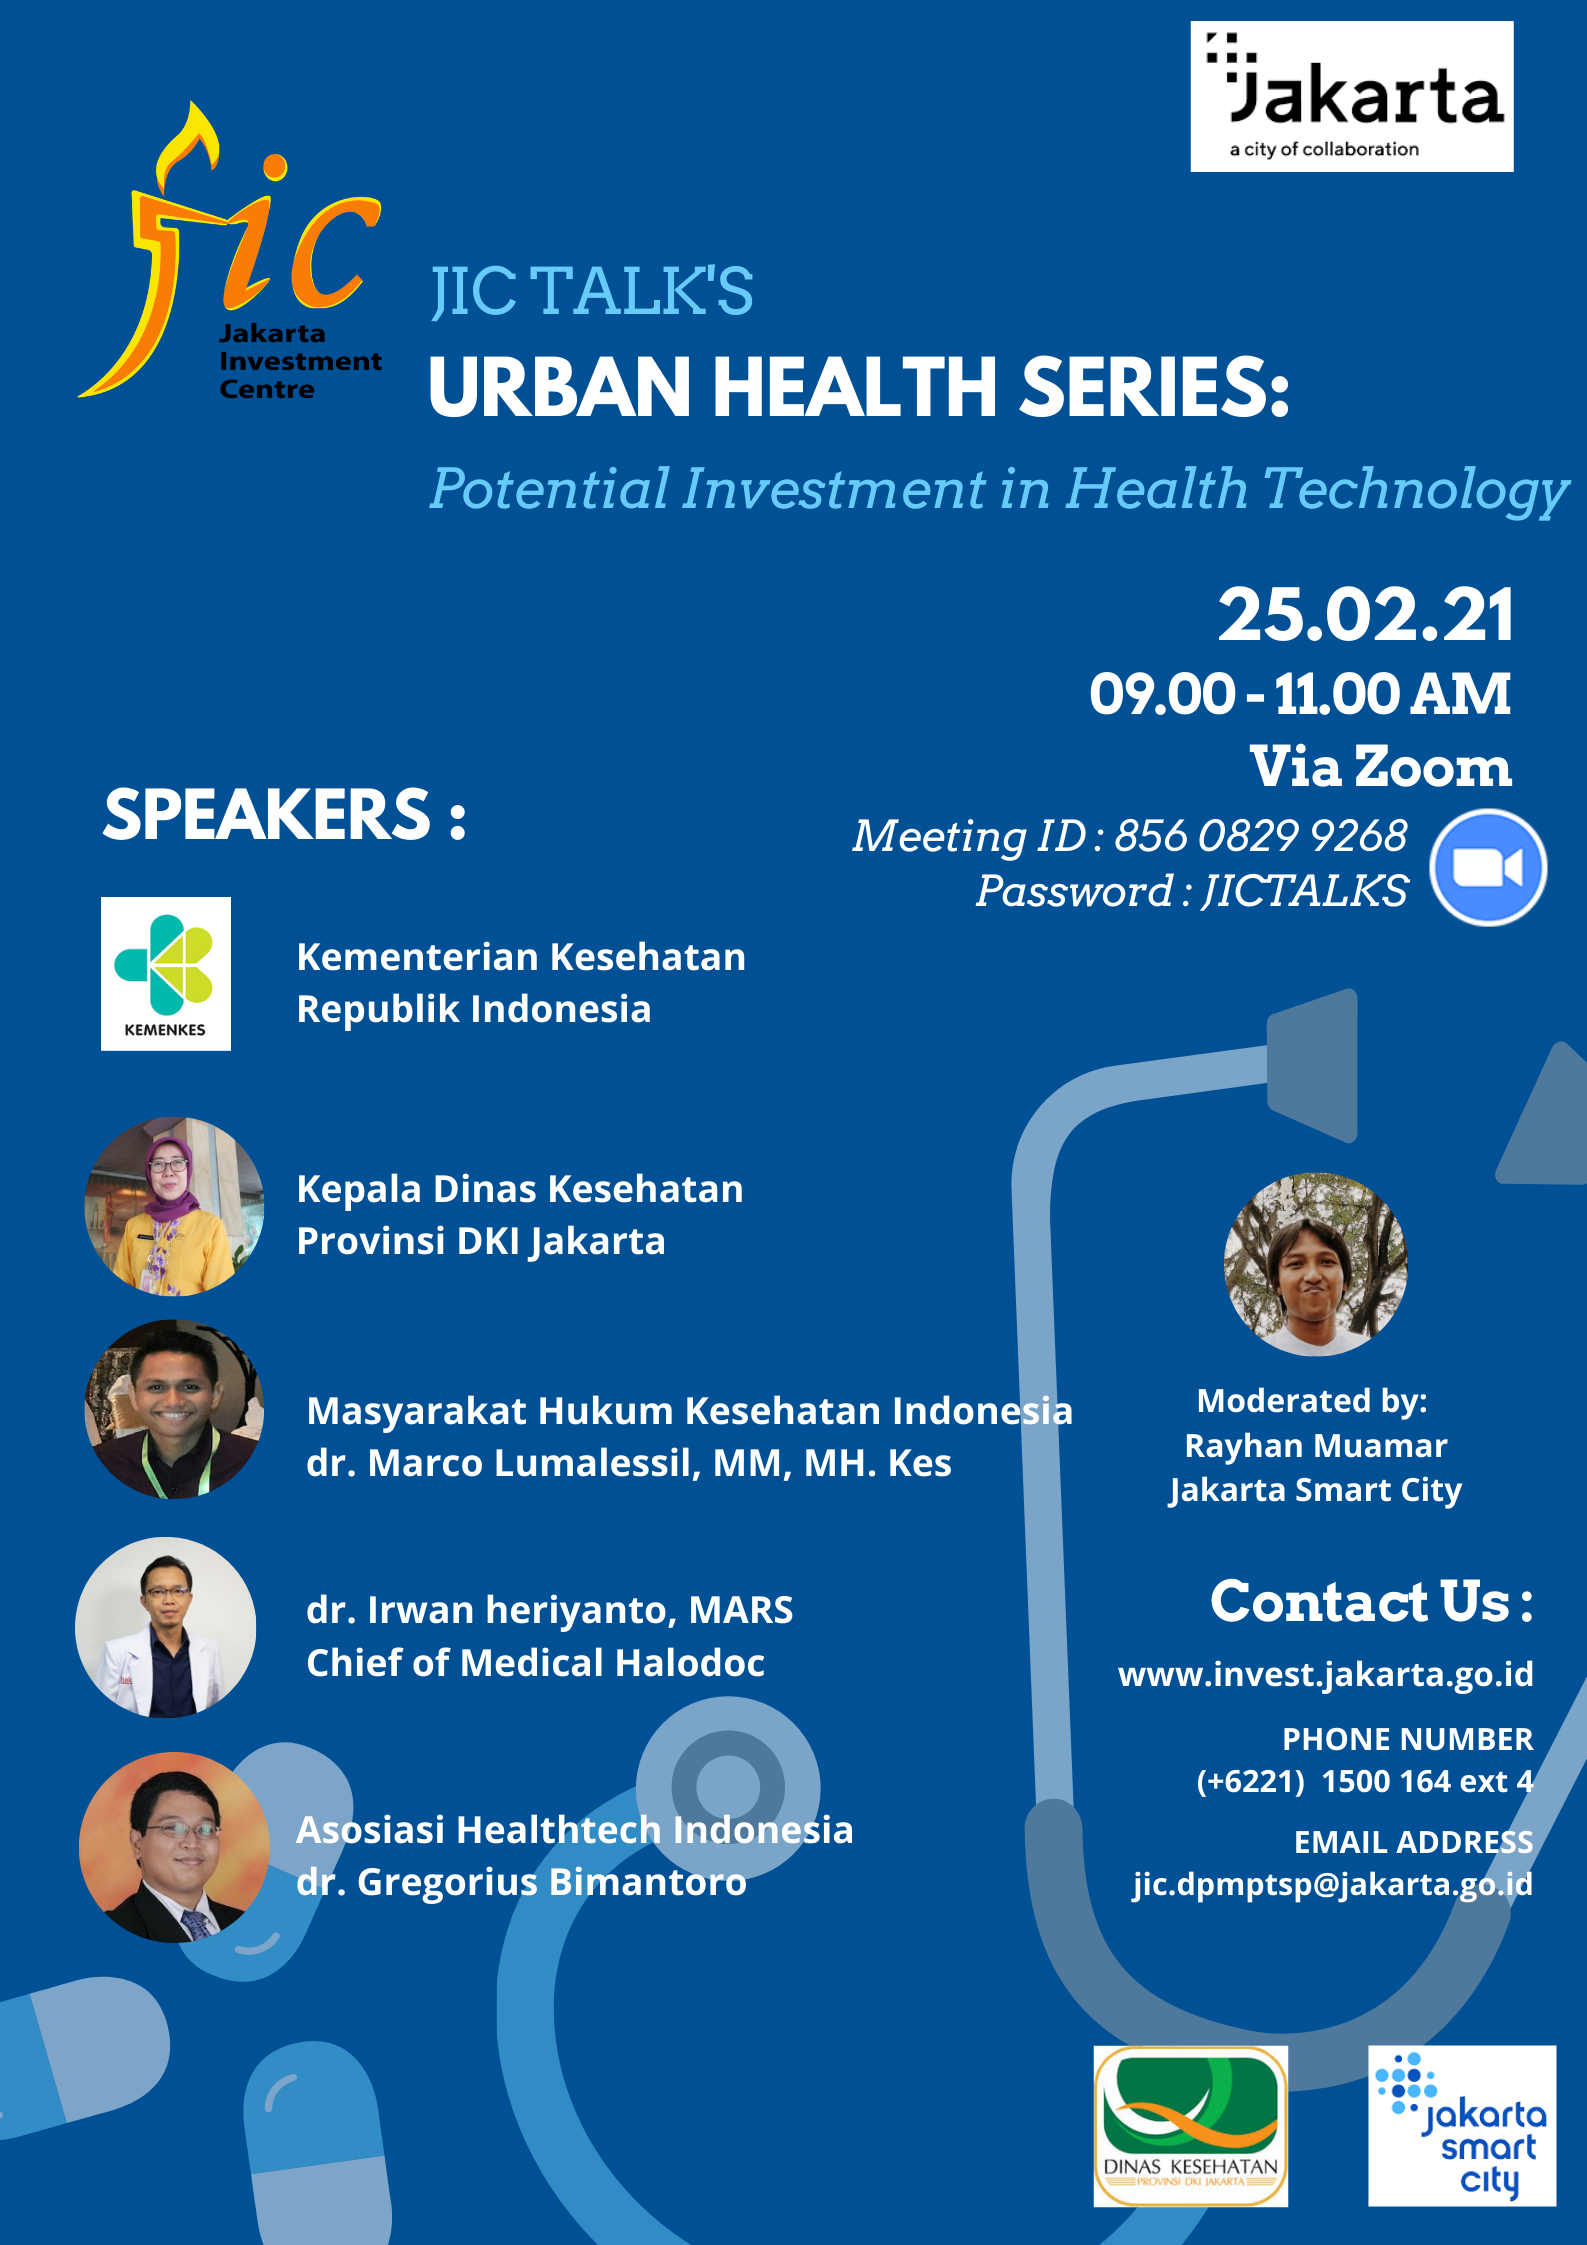 JIC TALK'S 2021 URBAN HEALTH SERIES : Potential Investment in Health Technology